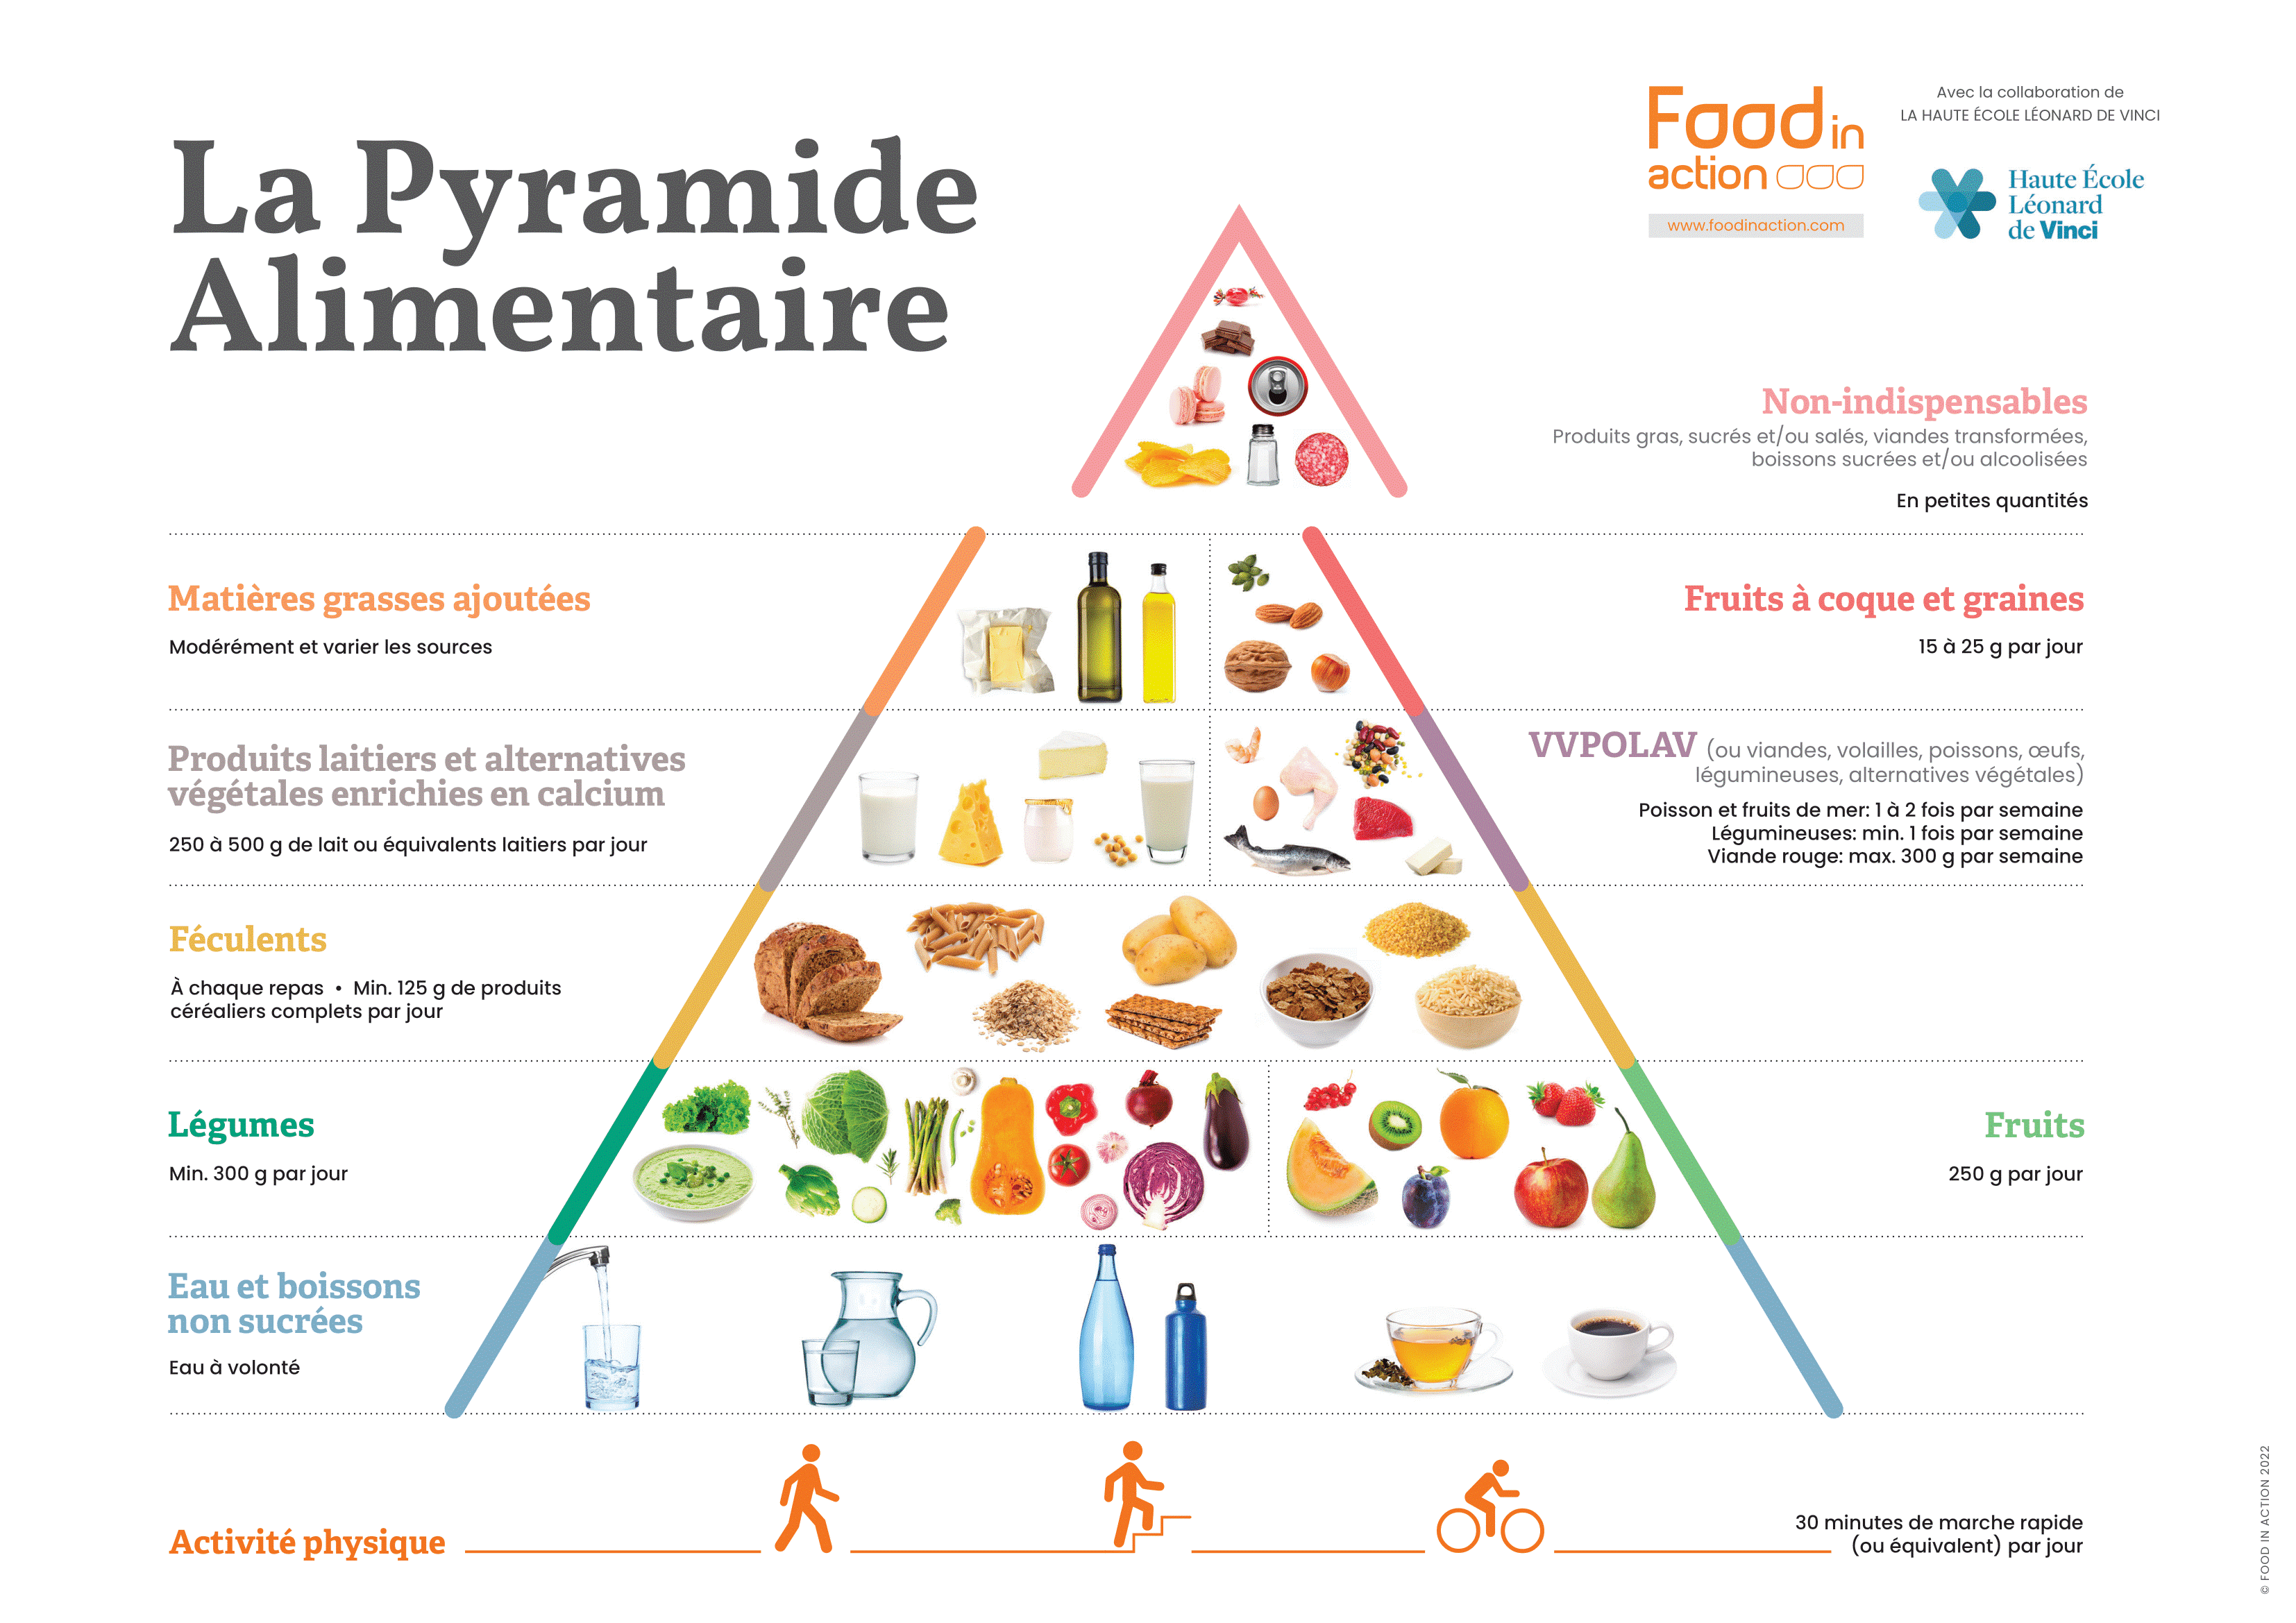 Pyramide alimentaire Food in action